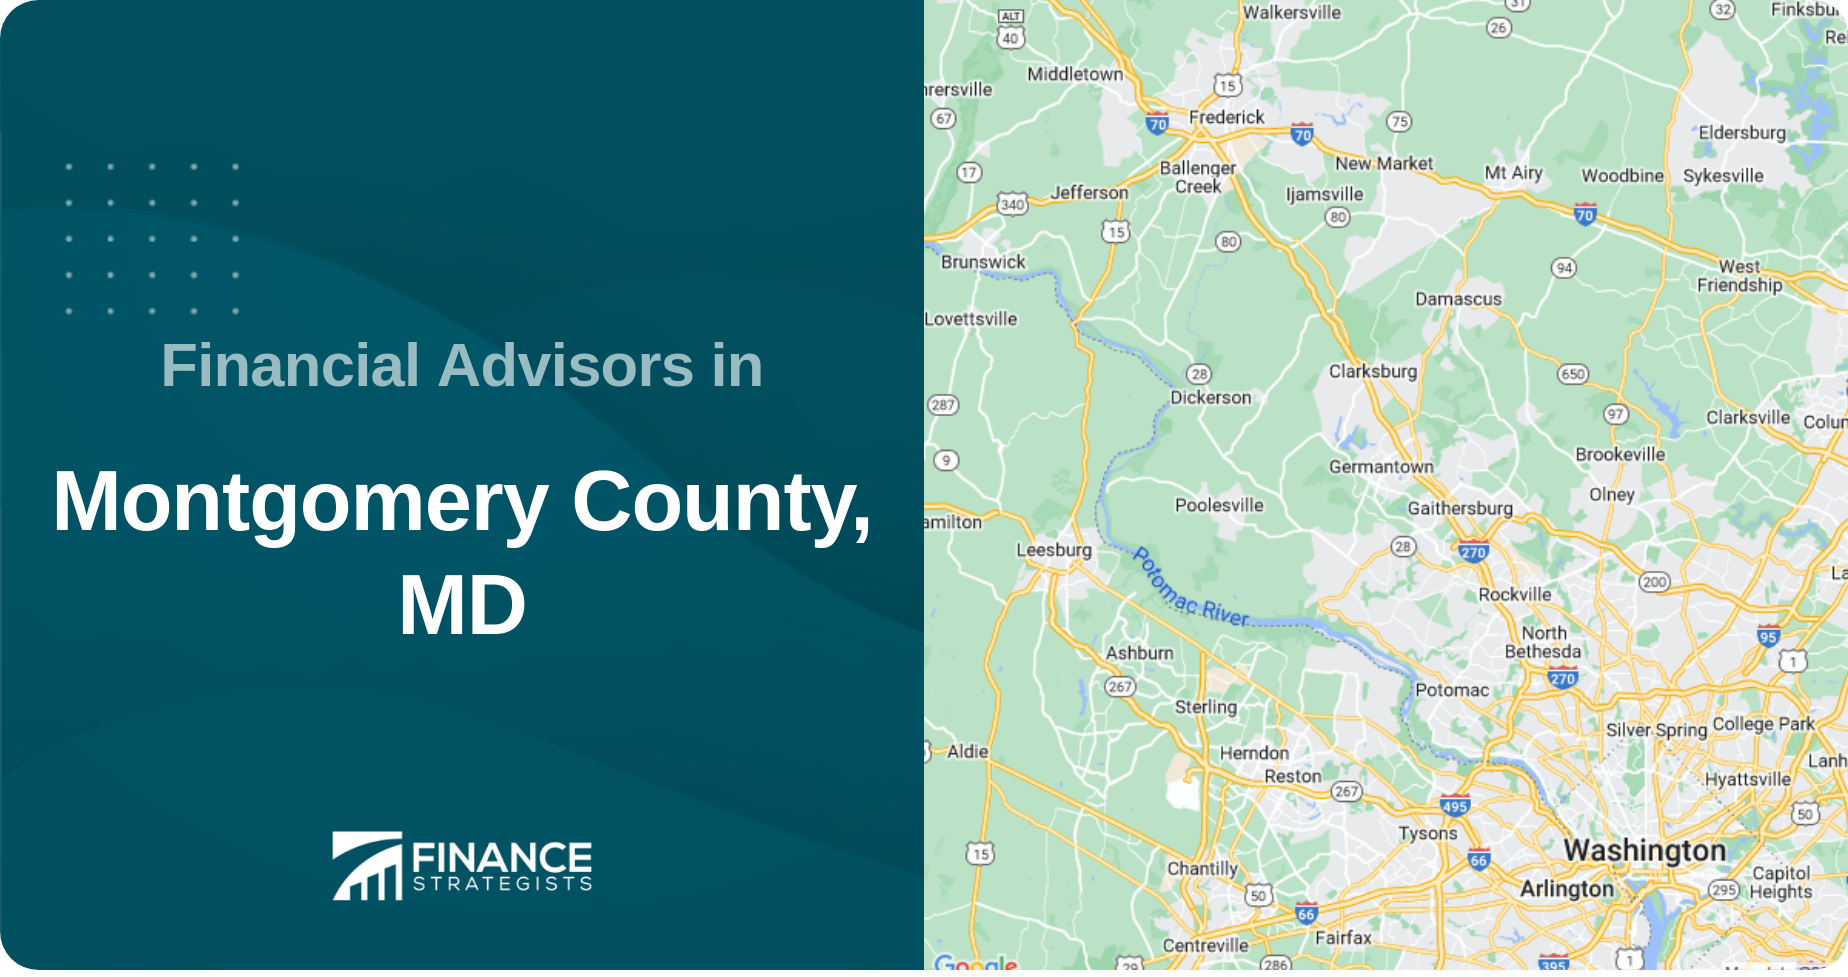 Financial Advisors in Montgomery County, MD